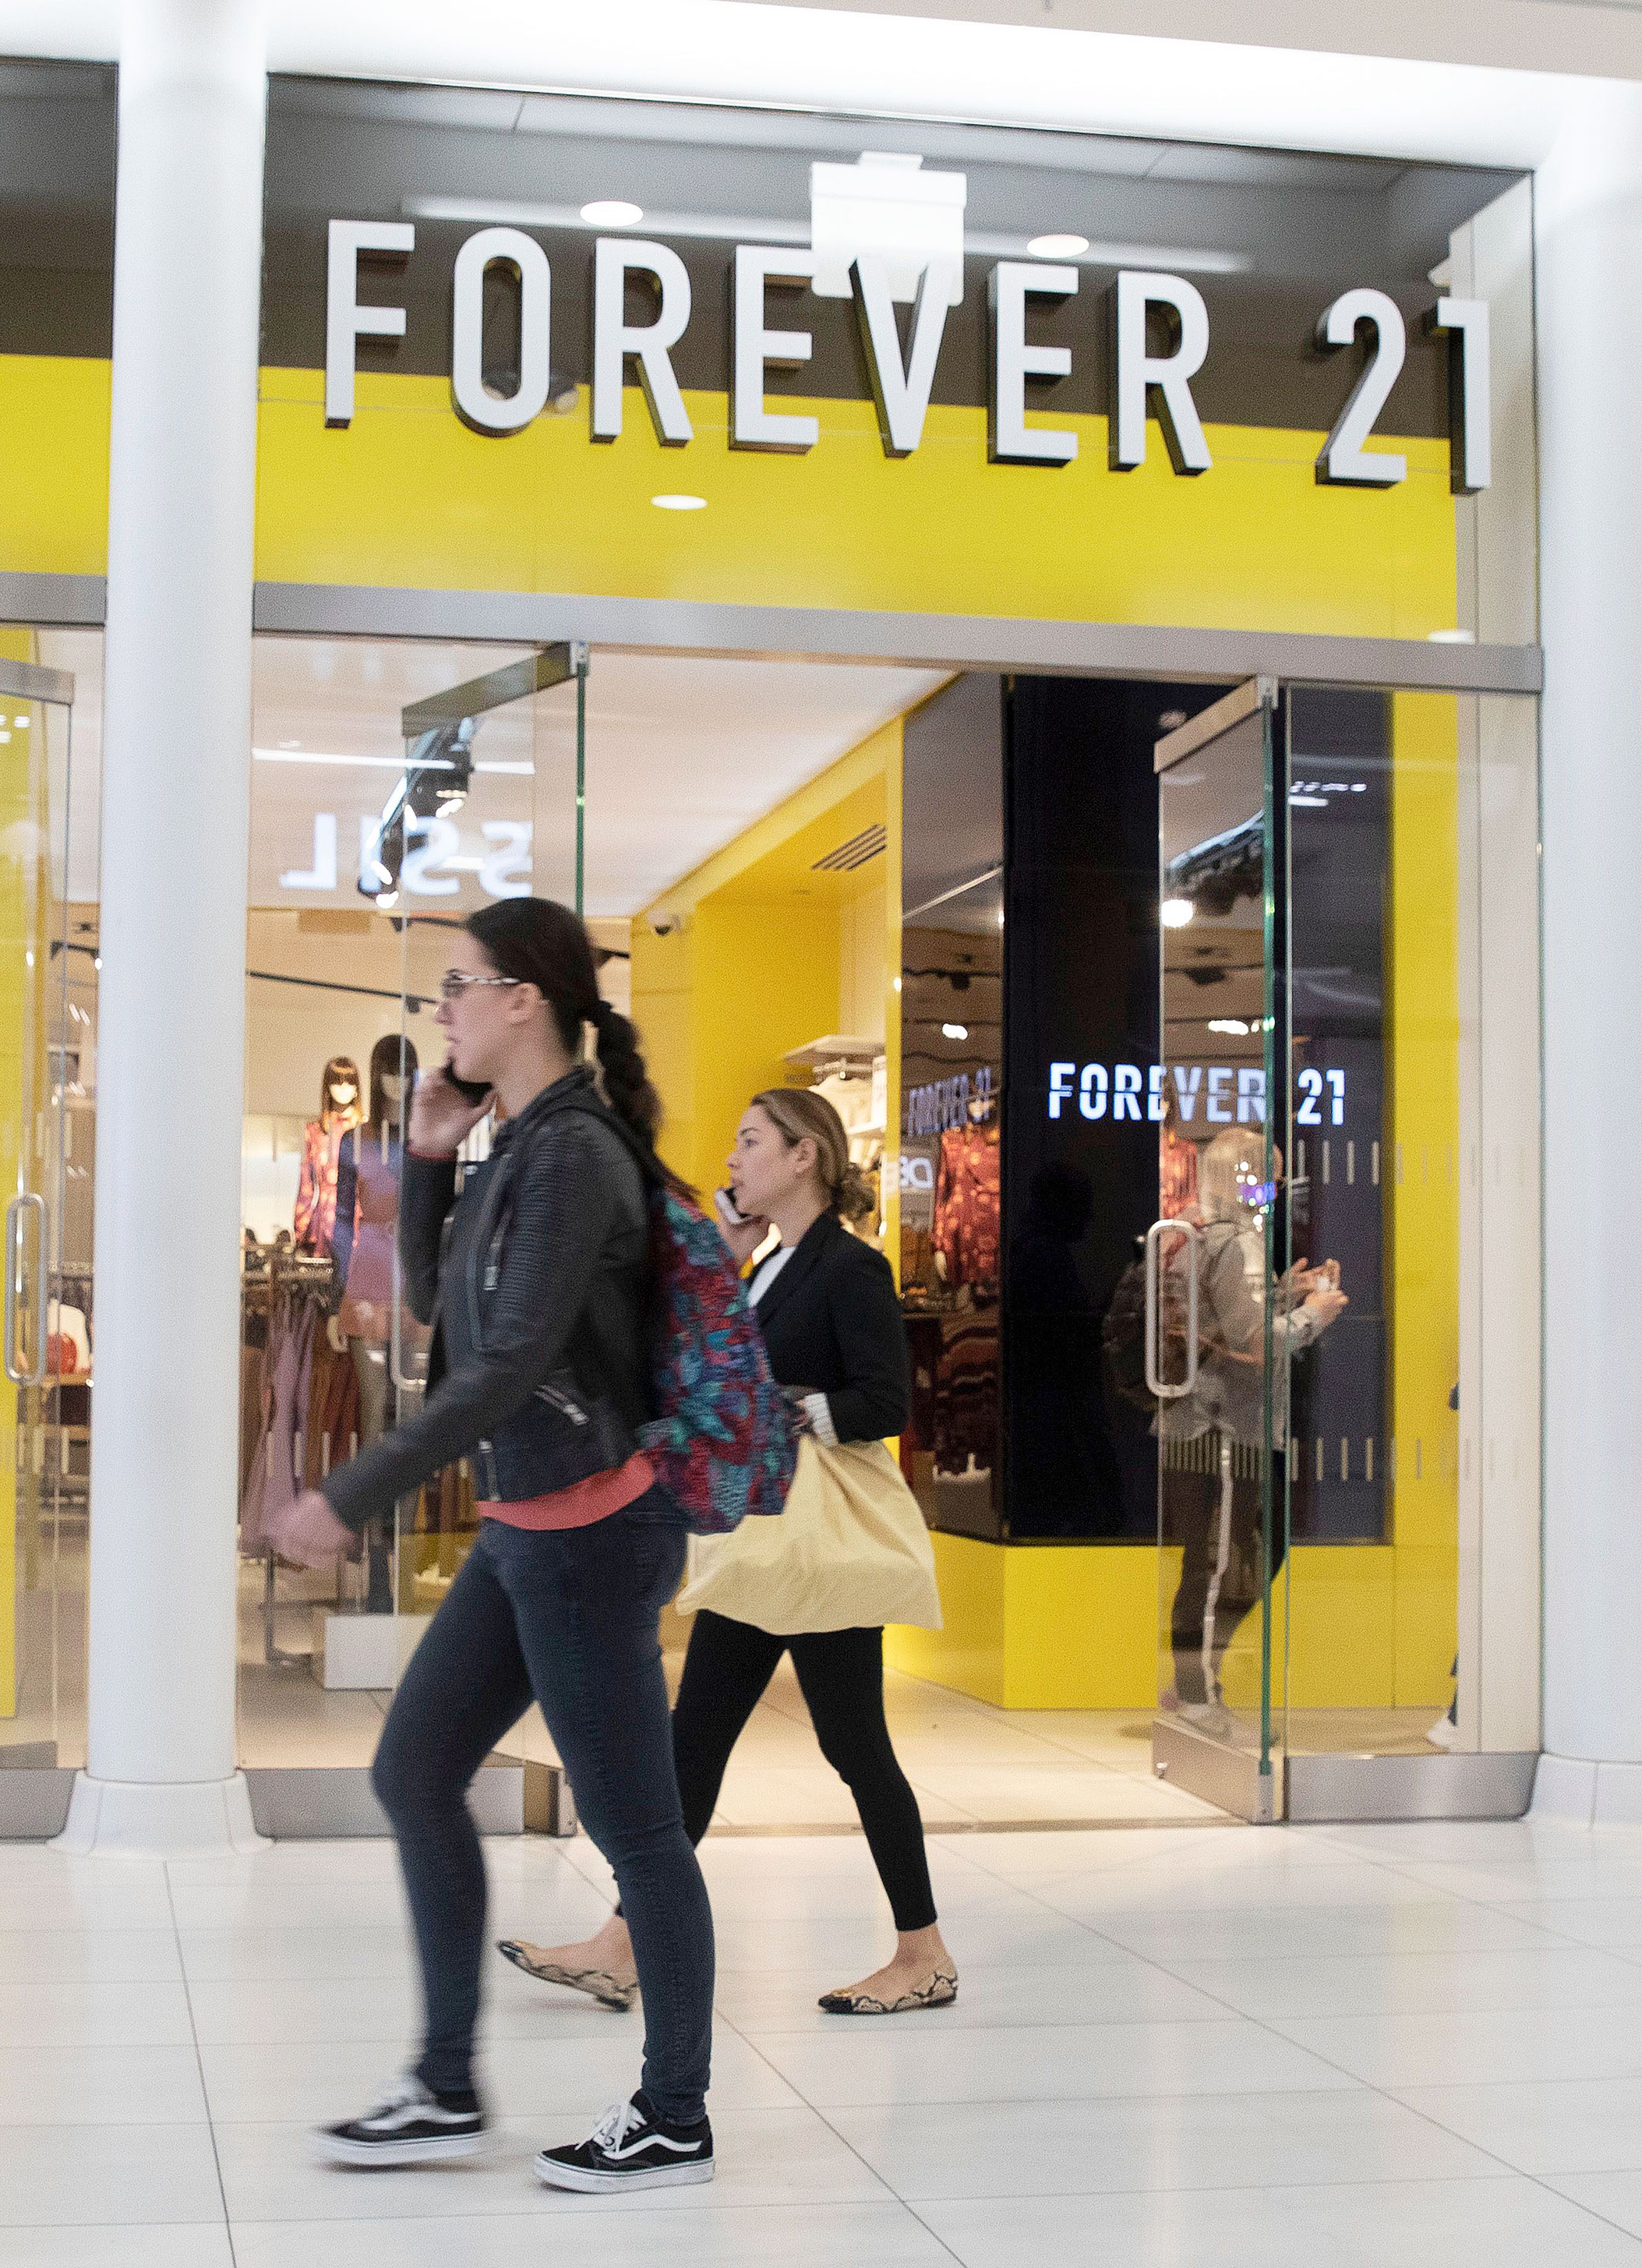 What's Left of Forever 21 in NYC After Filing for Bankruptcy